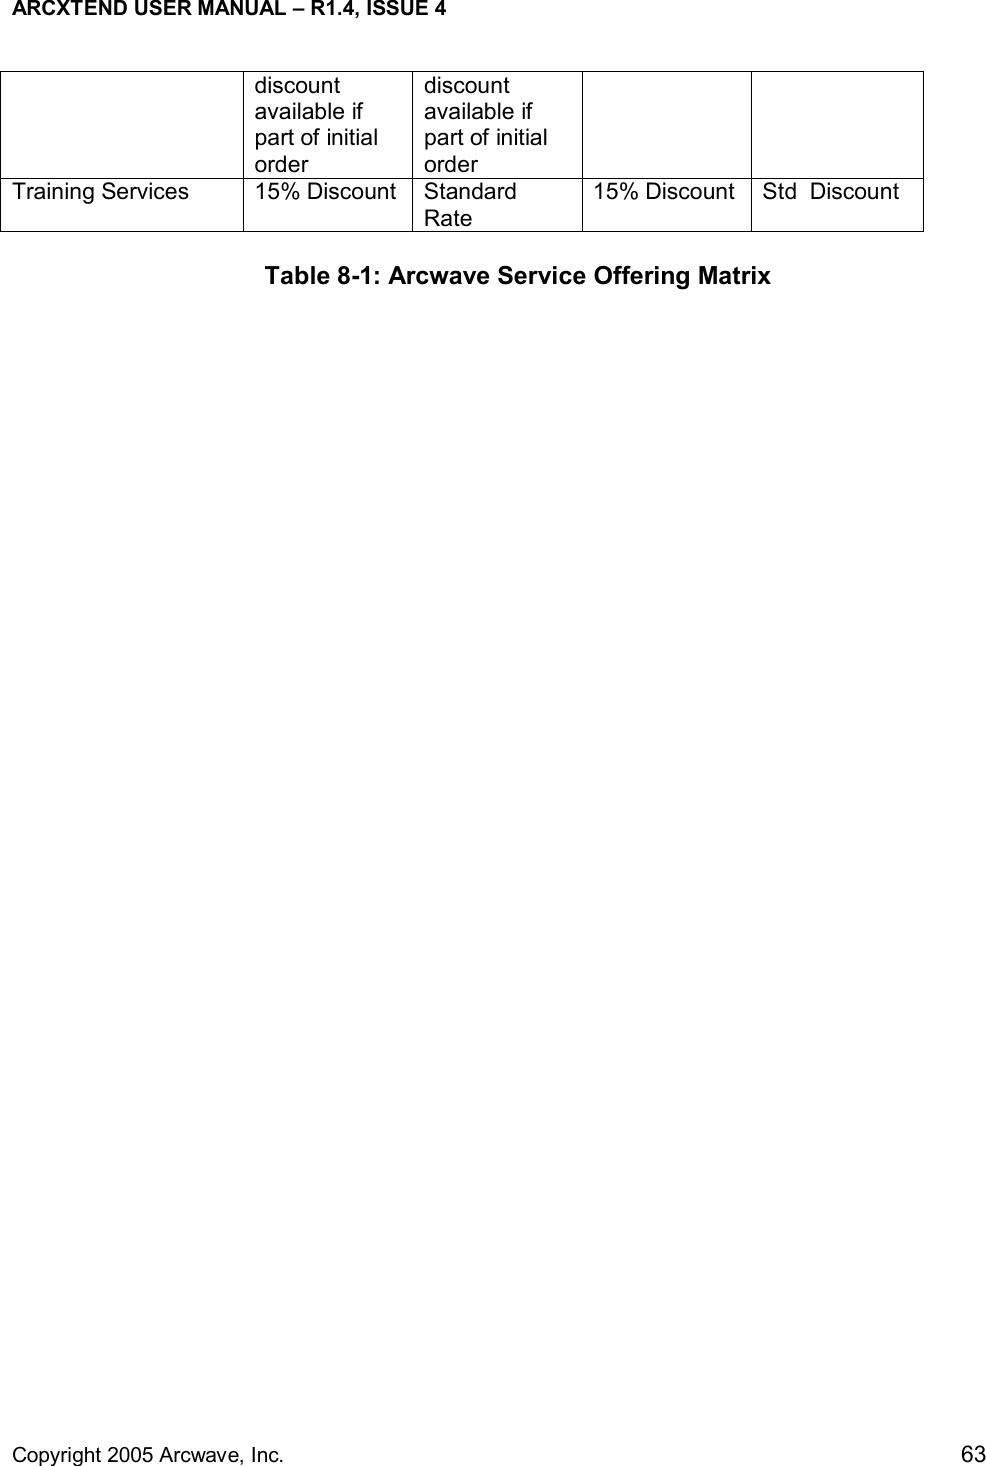 ARCXTEND USER MANUAL – R1.4, ISSUE 4  Copyright 2005 Arcwave, Inc.    63 discount available if part of initial order  discount available if part of initial order Training Services  15% Discount  Standard Rate 15% Discount  Std  Discount Table 8-1: Arcwave Service Offering Matrix 